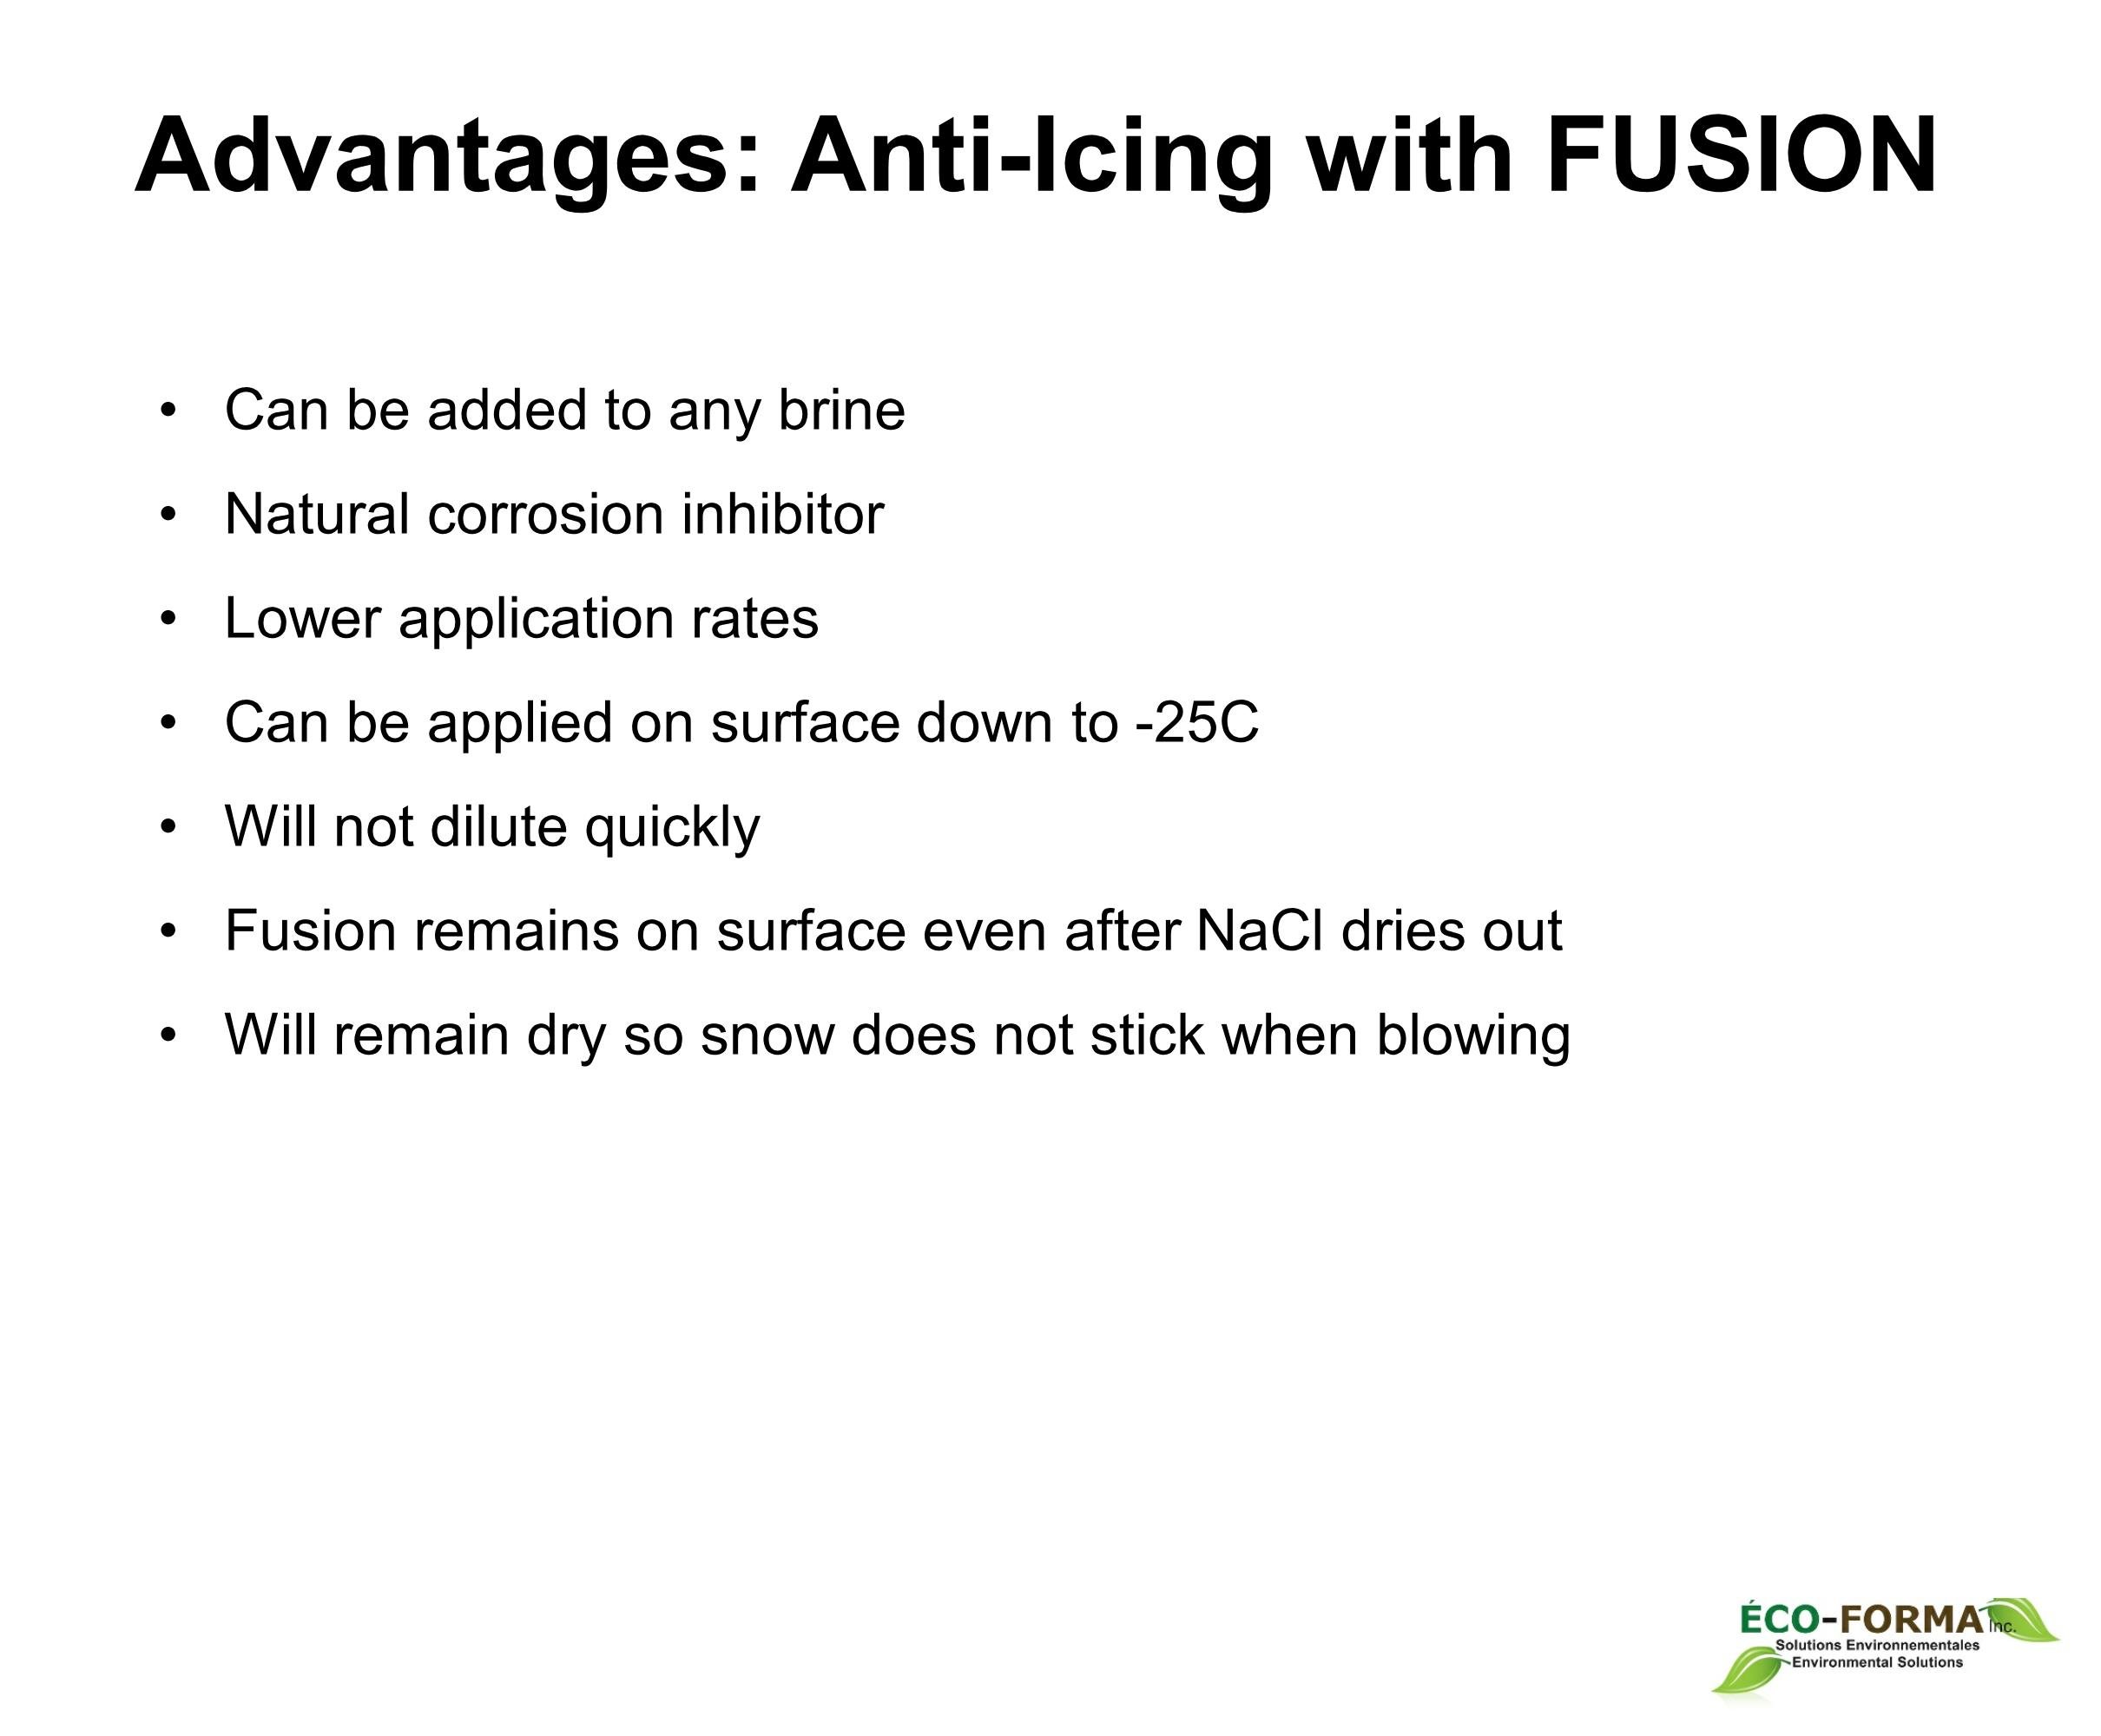 Eco-Forma_Anti-Icing with FUSION2350_St-Constant - 2021 02 14_ENGLISH_Page_6.jpeg